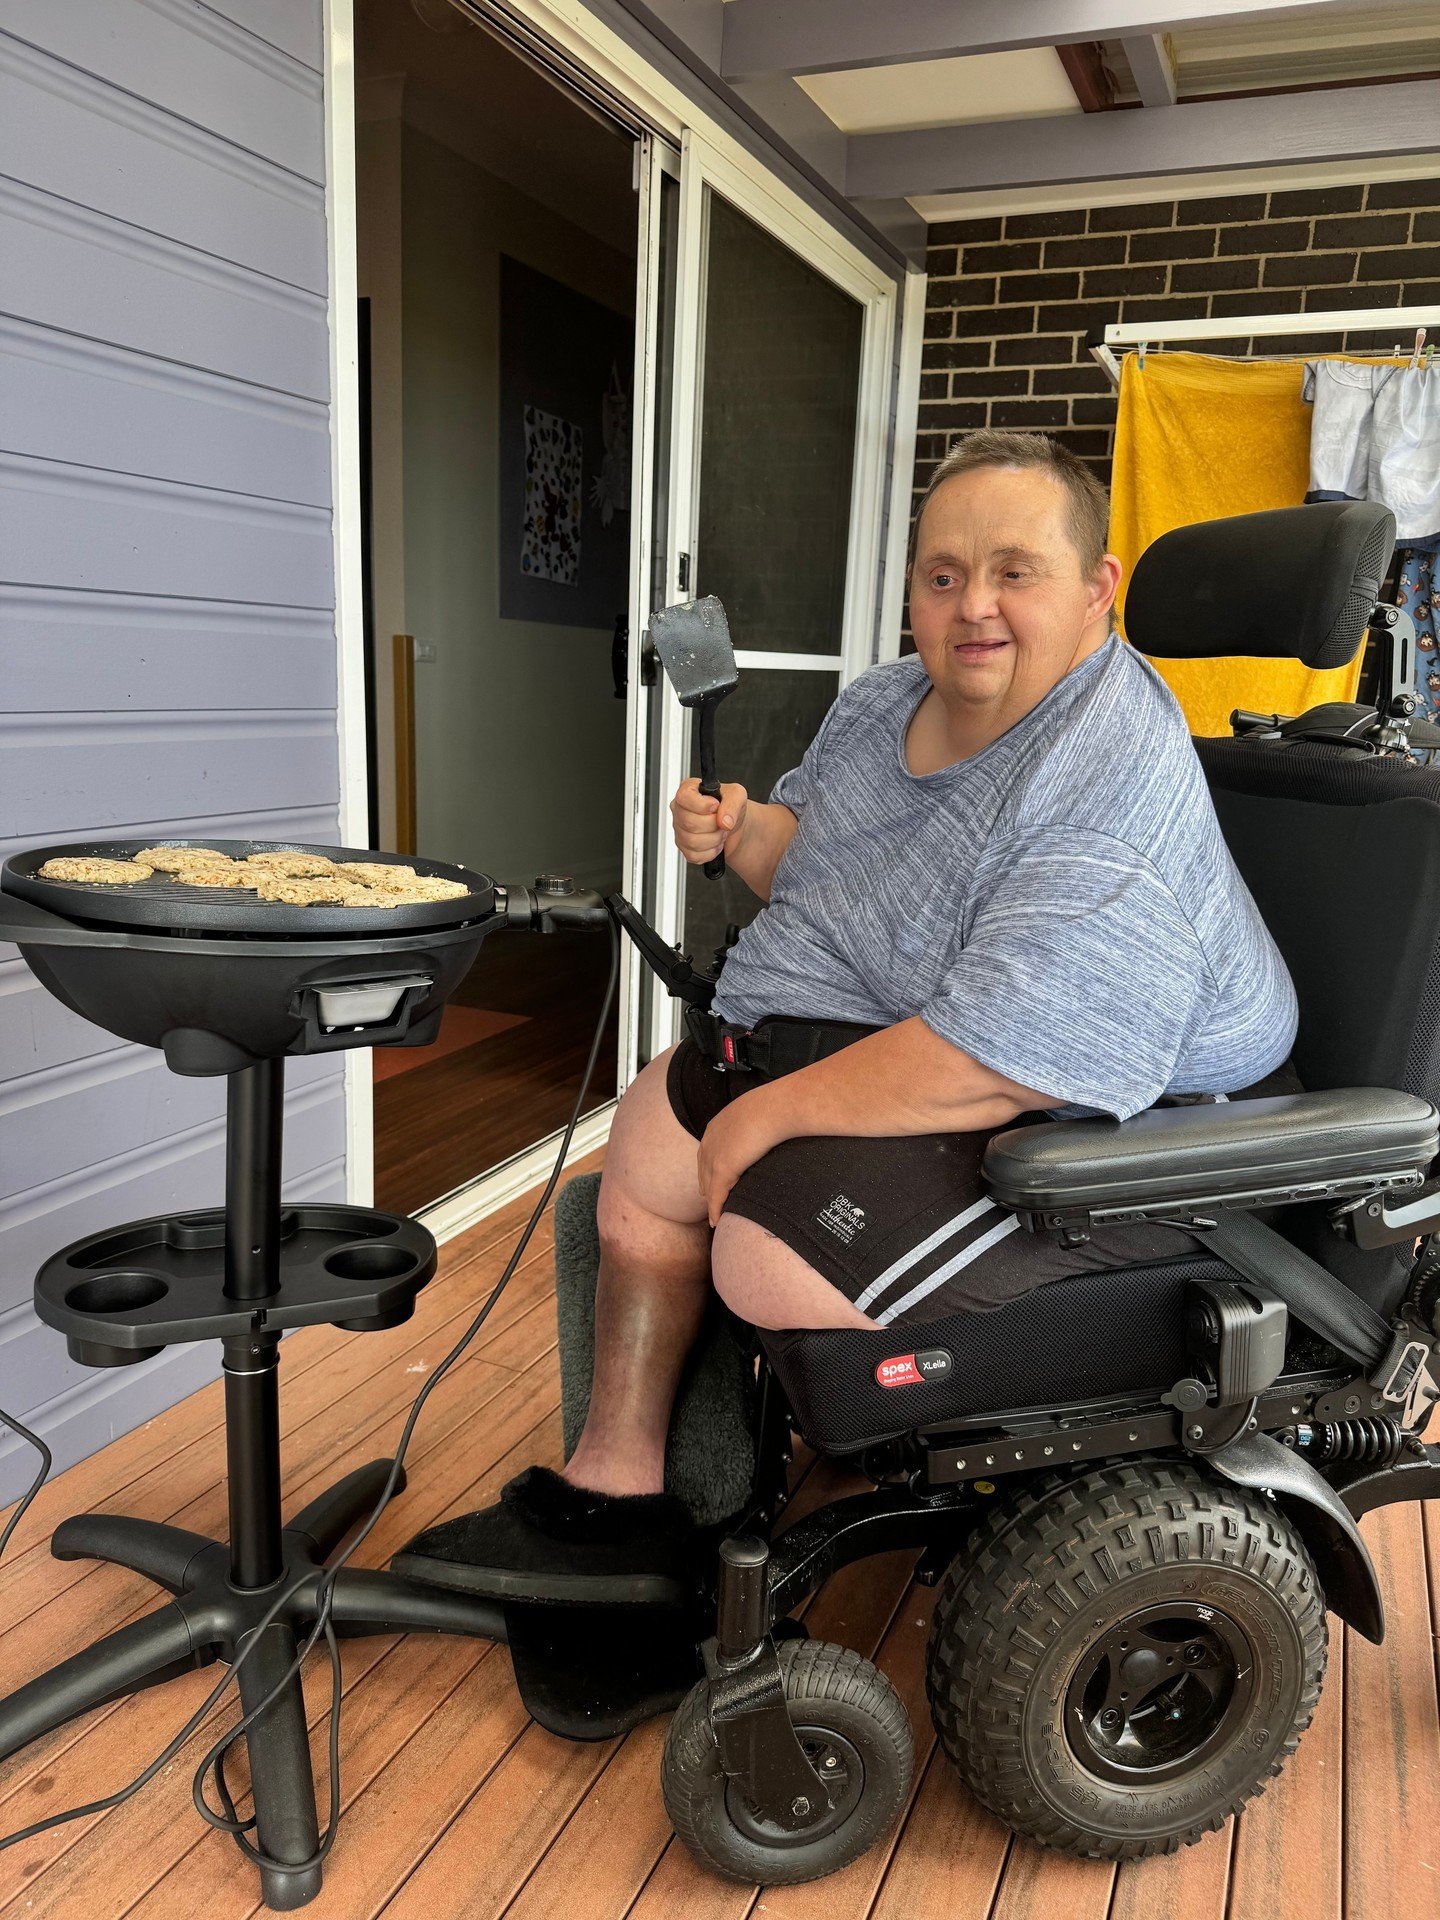 BBQ's are the flavor of the day for our participants. As part of supporting our participants to reach their goals we have sourced some new BBQ's so participants can cook a BBQ at home. They are loving the new outdoor cooking option and are making the